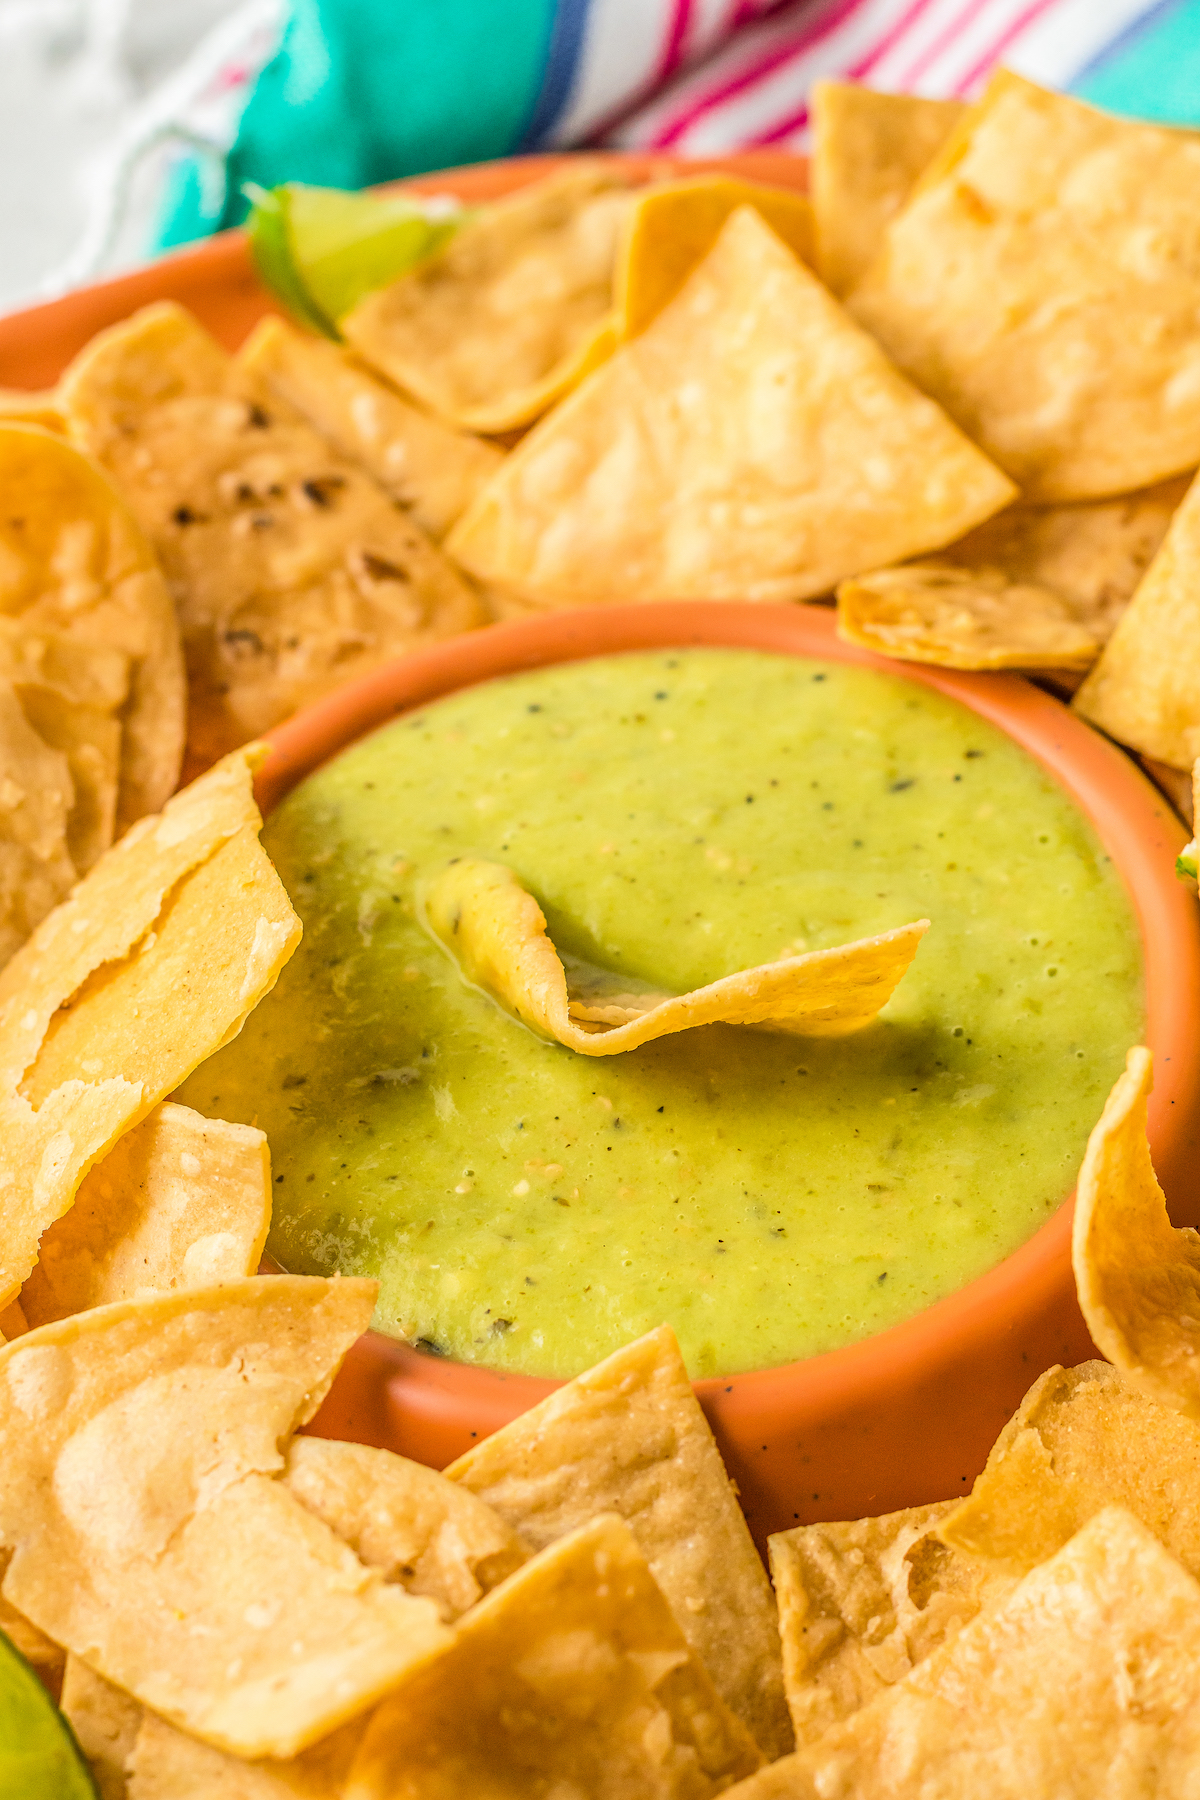 A salsa dish with chips surrounding it. One chip is dipped into the salsa.